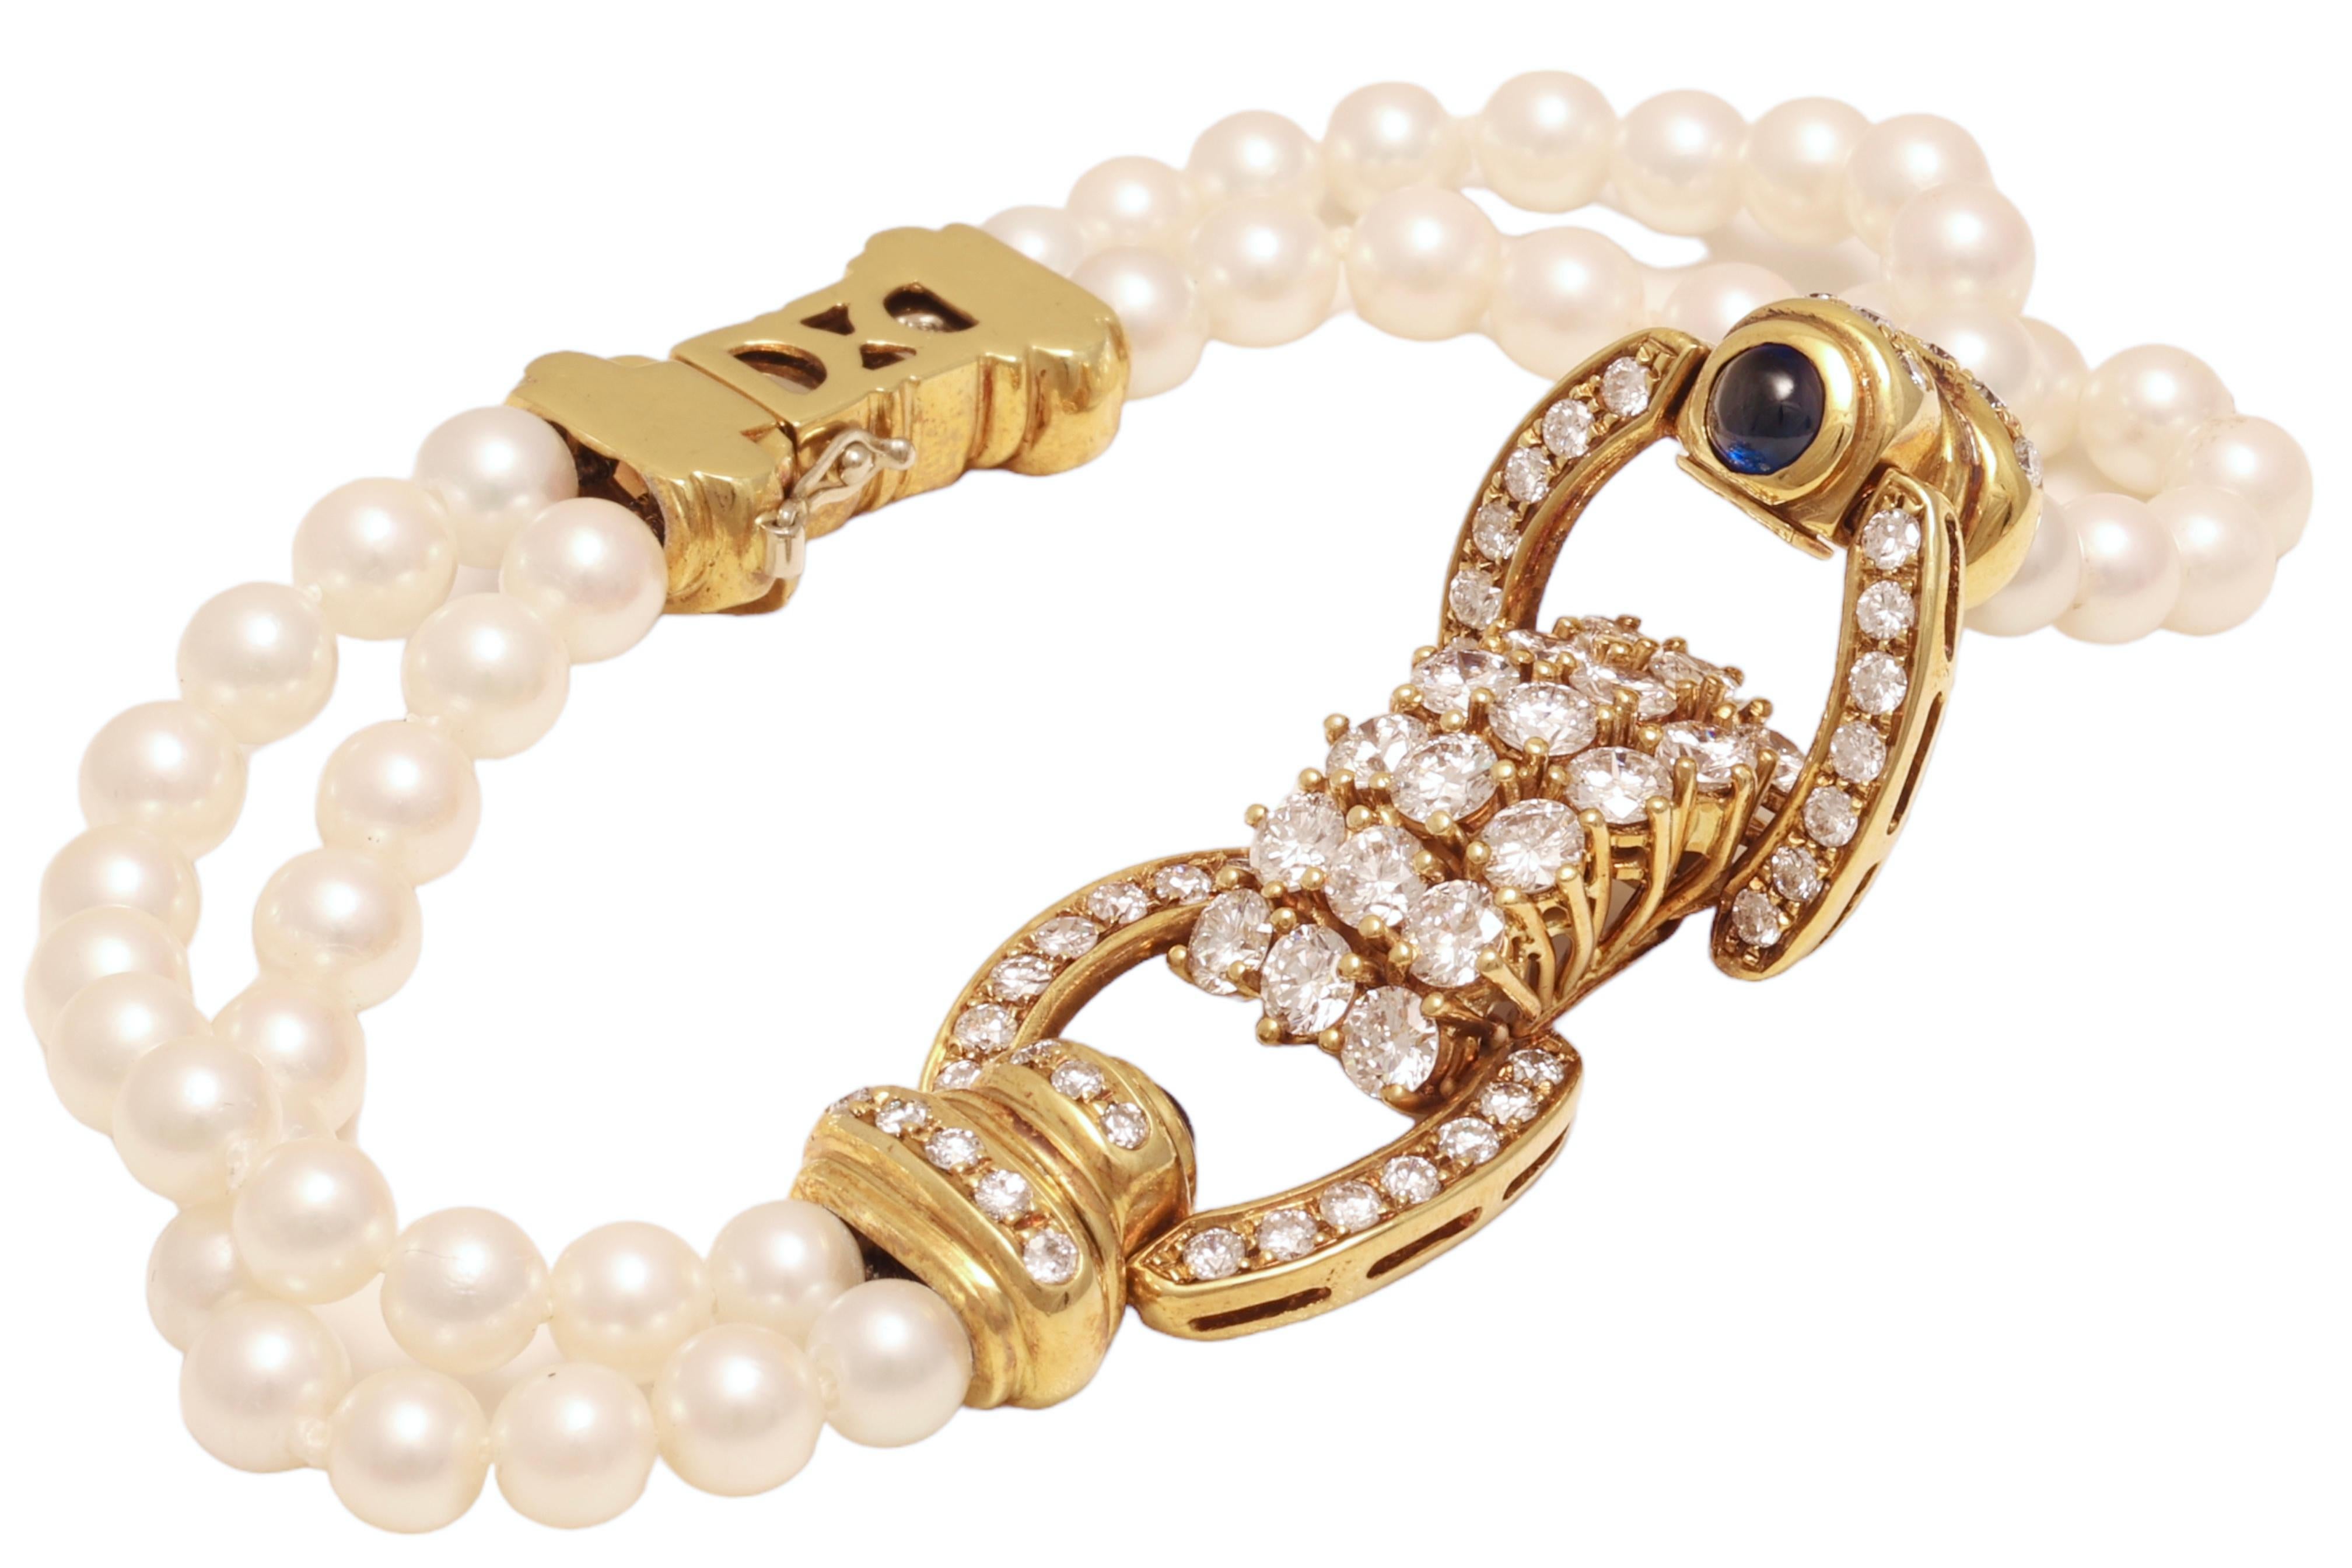 Artisan Pearl Bracelet in 18kt Yellow Gold Set With 3.58ct. Diamonds, Pearls & Sapphires For Sale